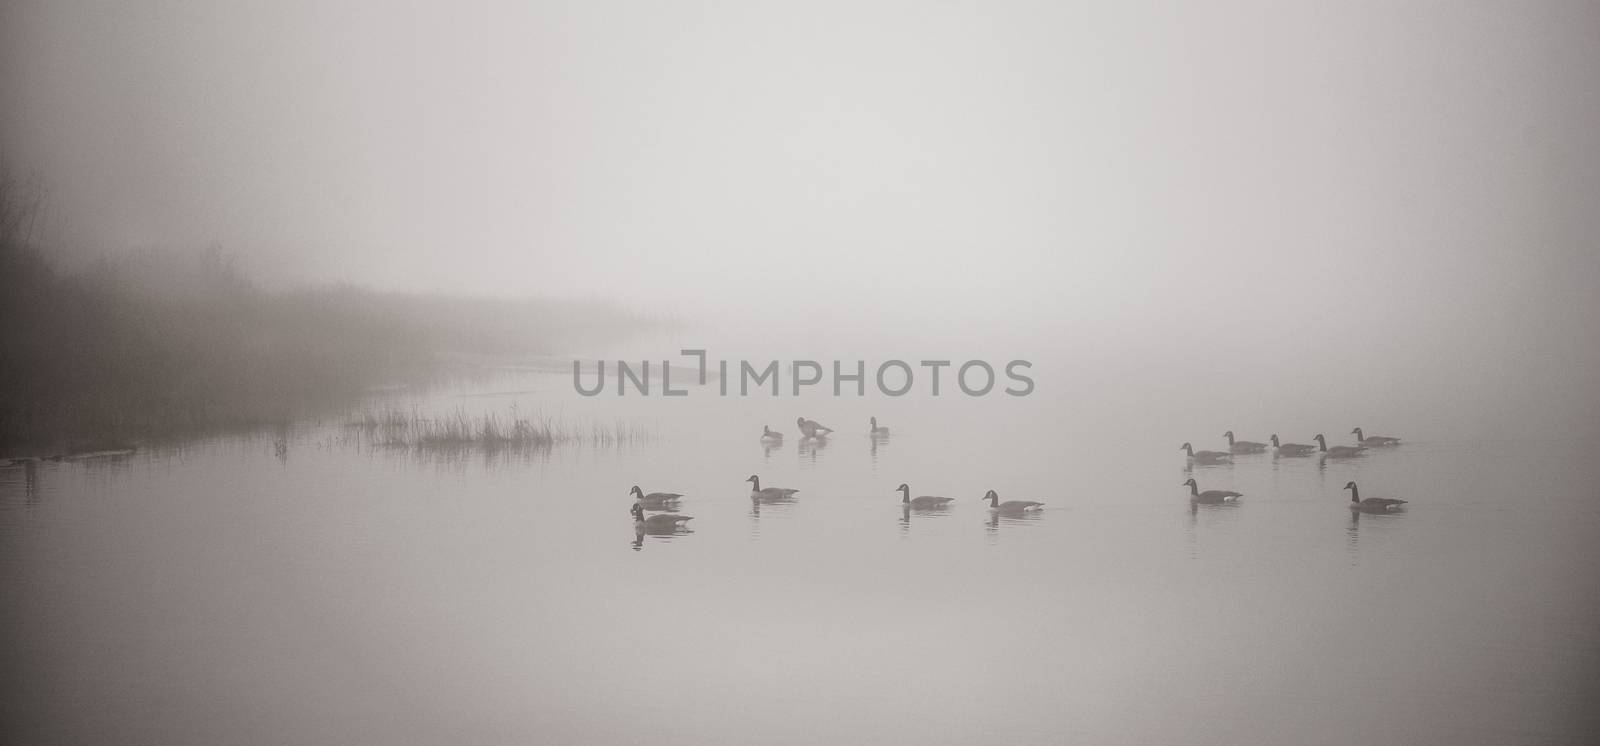 A gaggle of Canadian geese  navigating a heavy November fog and waters on their way south.